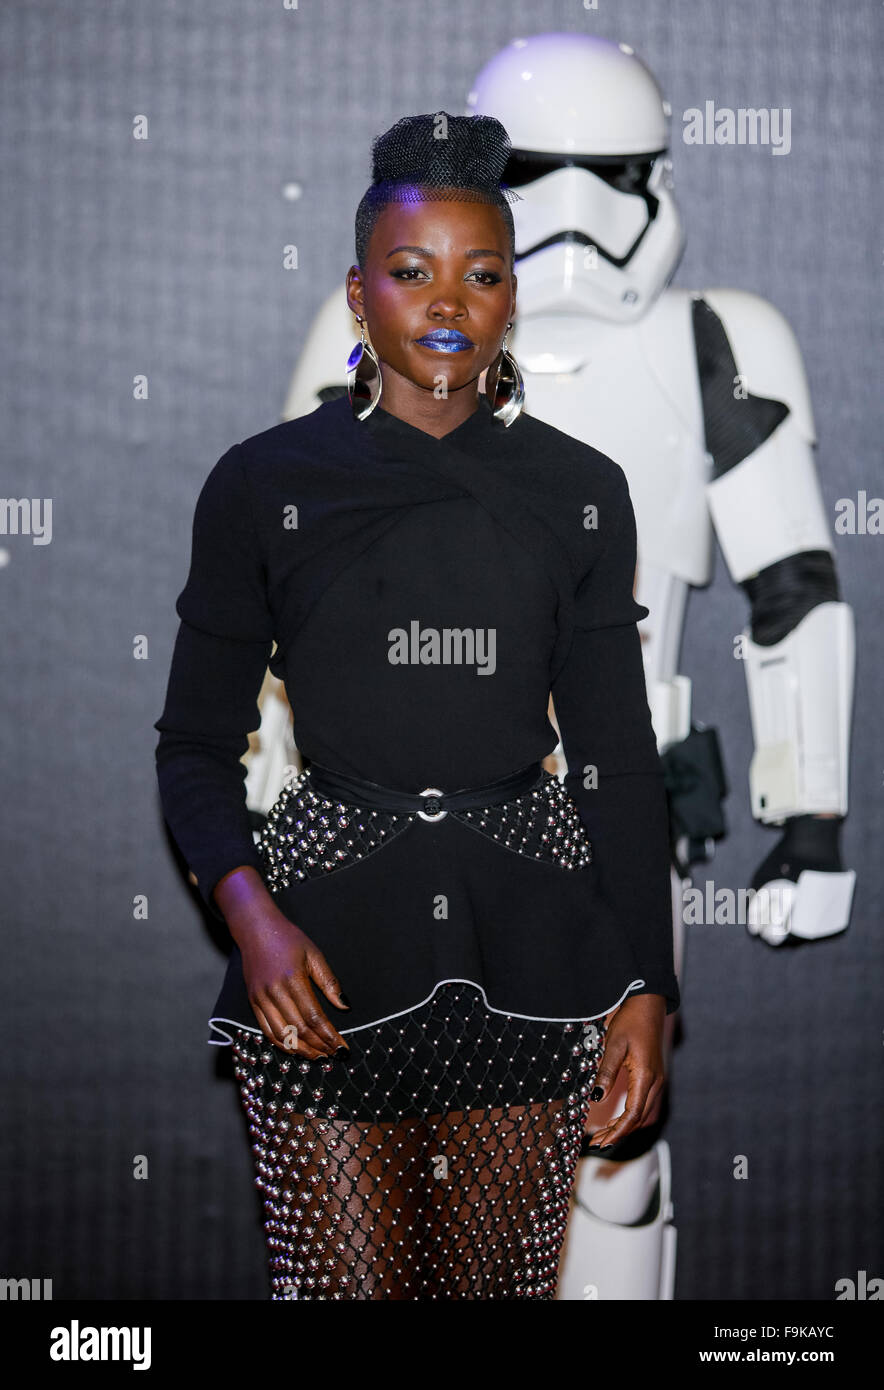 London, UK. 16th December, 2015. Lupita Nyong'o Actress Star Wars; The Force Awakens, European Premiere London, England 16 December 2015 Diu83967 Credit:  Allstar Picture Library/Alamy Live News Stock Photo